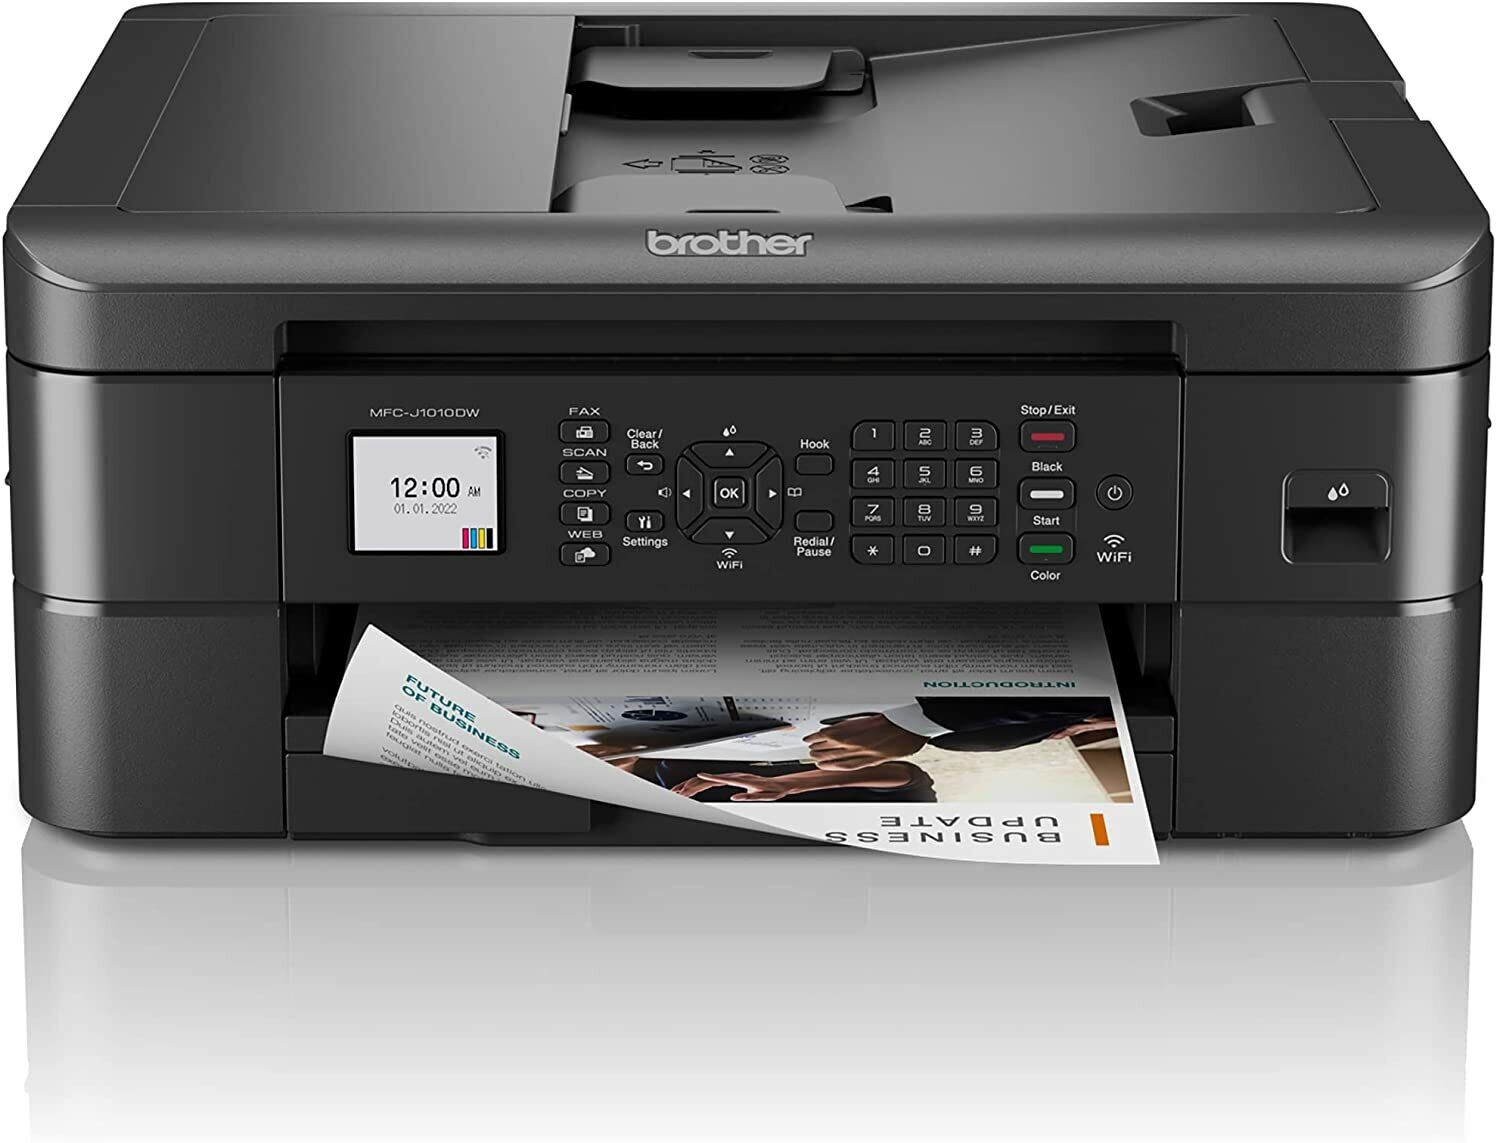 Brand New & Sealed Brother MFC-J1010DW Wireless Color Inkjet All-in-One Printer